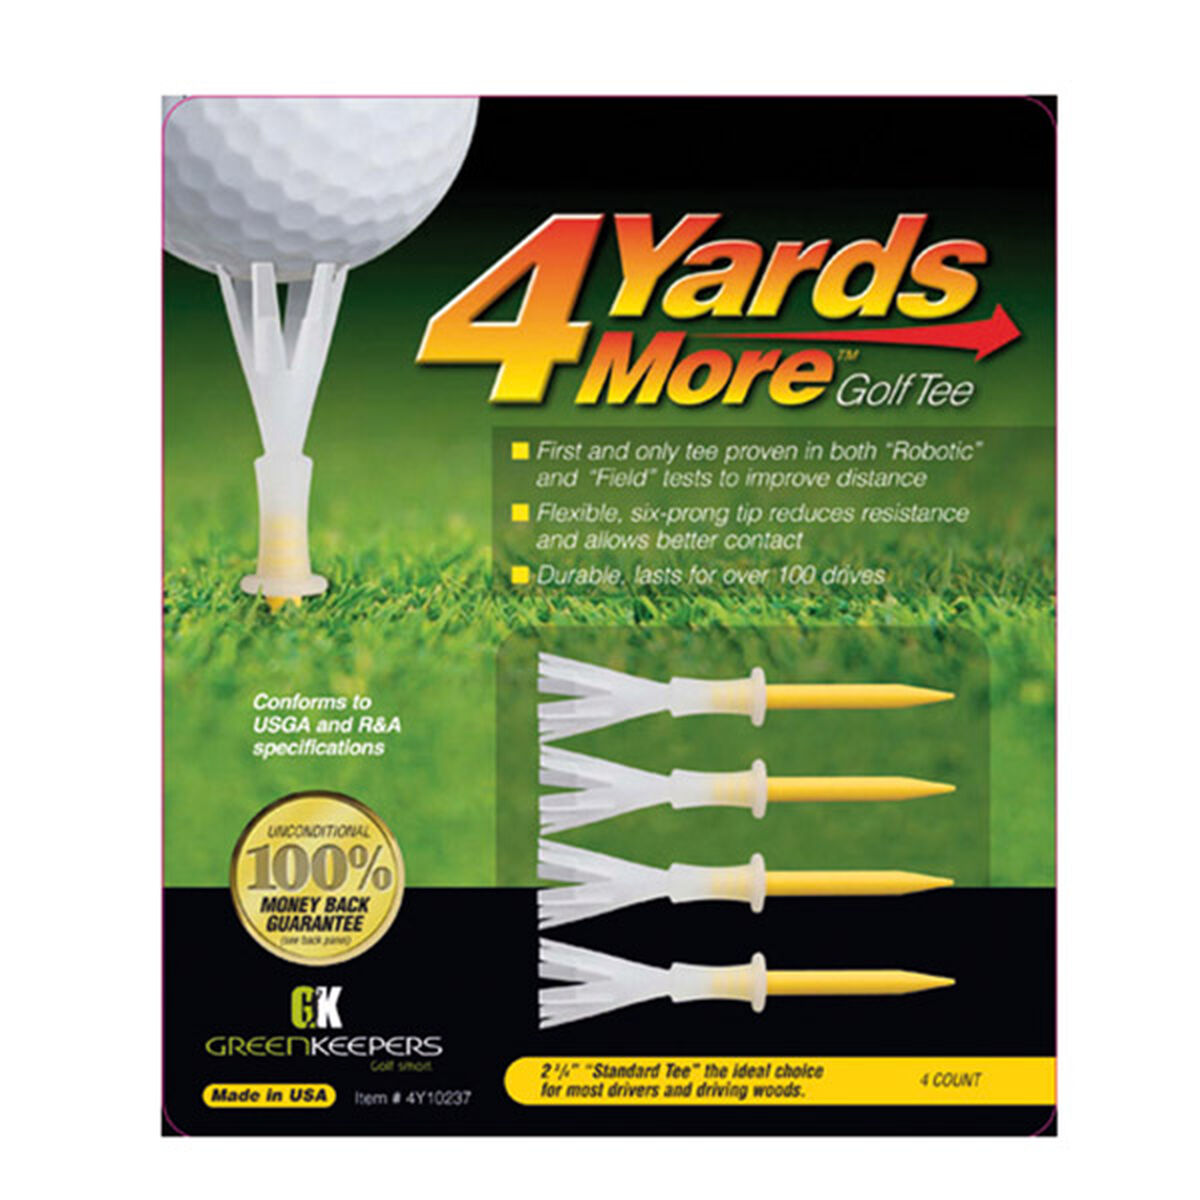 4 Yards More Yellow Pack of 4 Standard Golf Tees, Size: 2 3/4", 2 3/4 Inches | American Golf